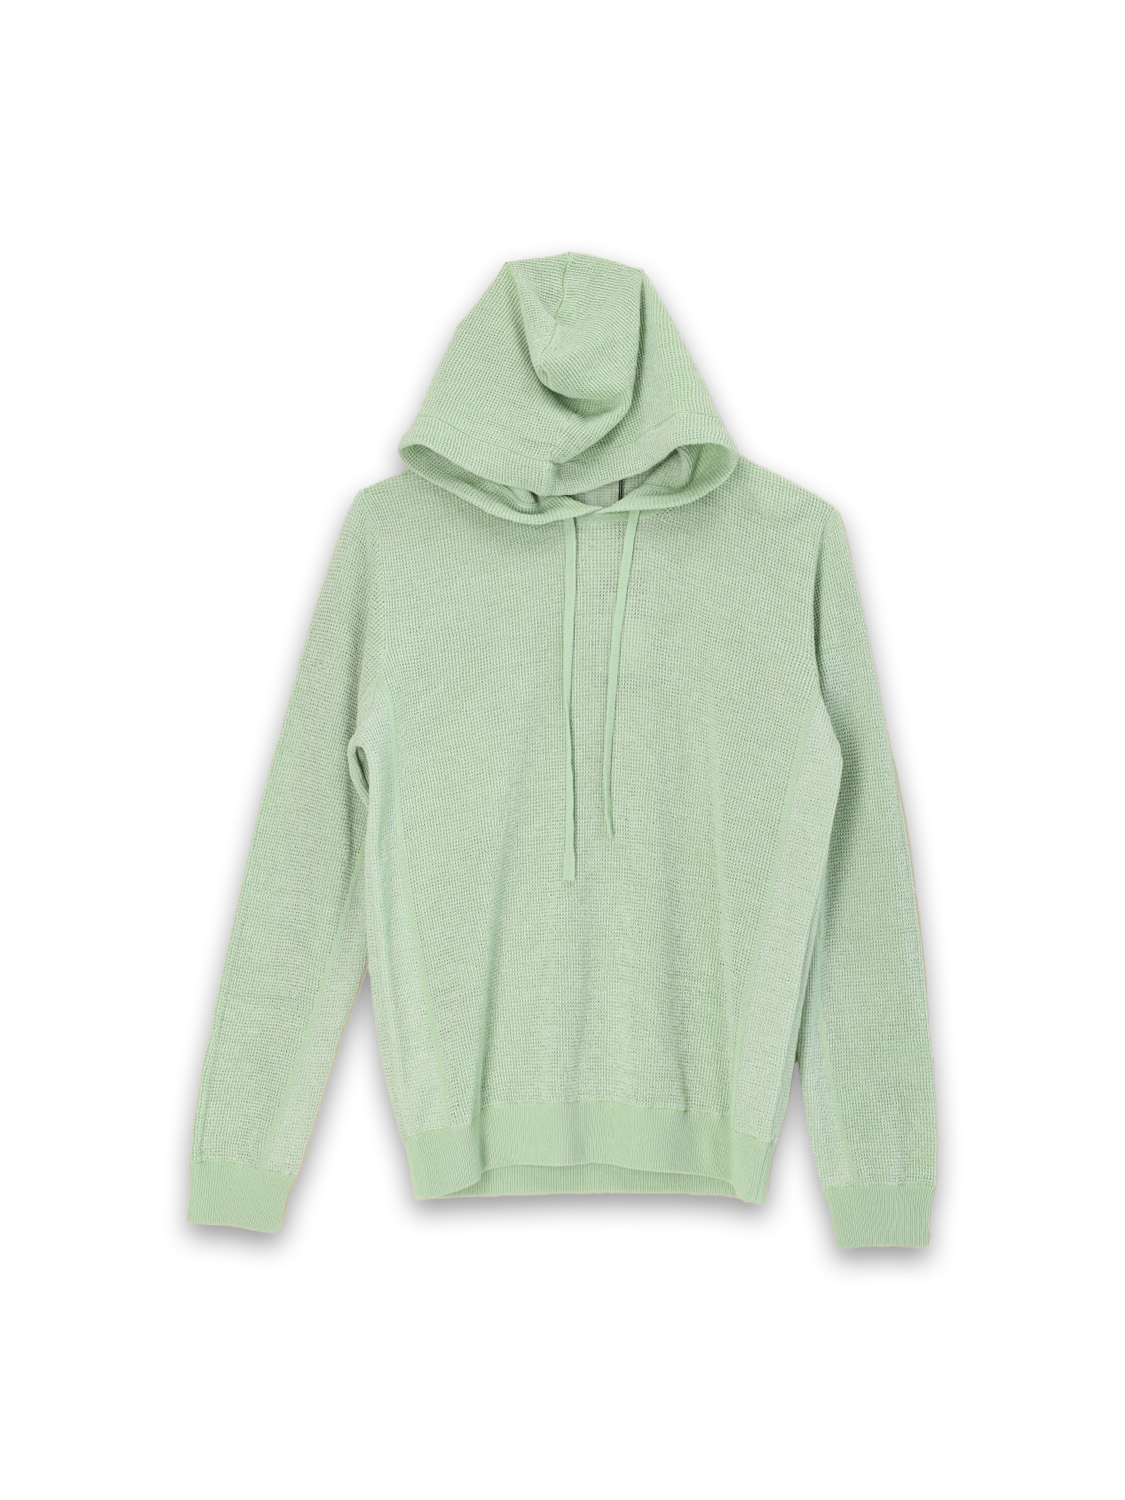 Capuccino - hooded sweater 